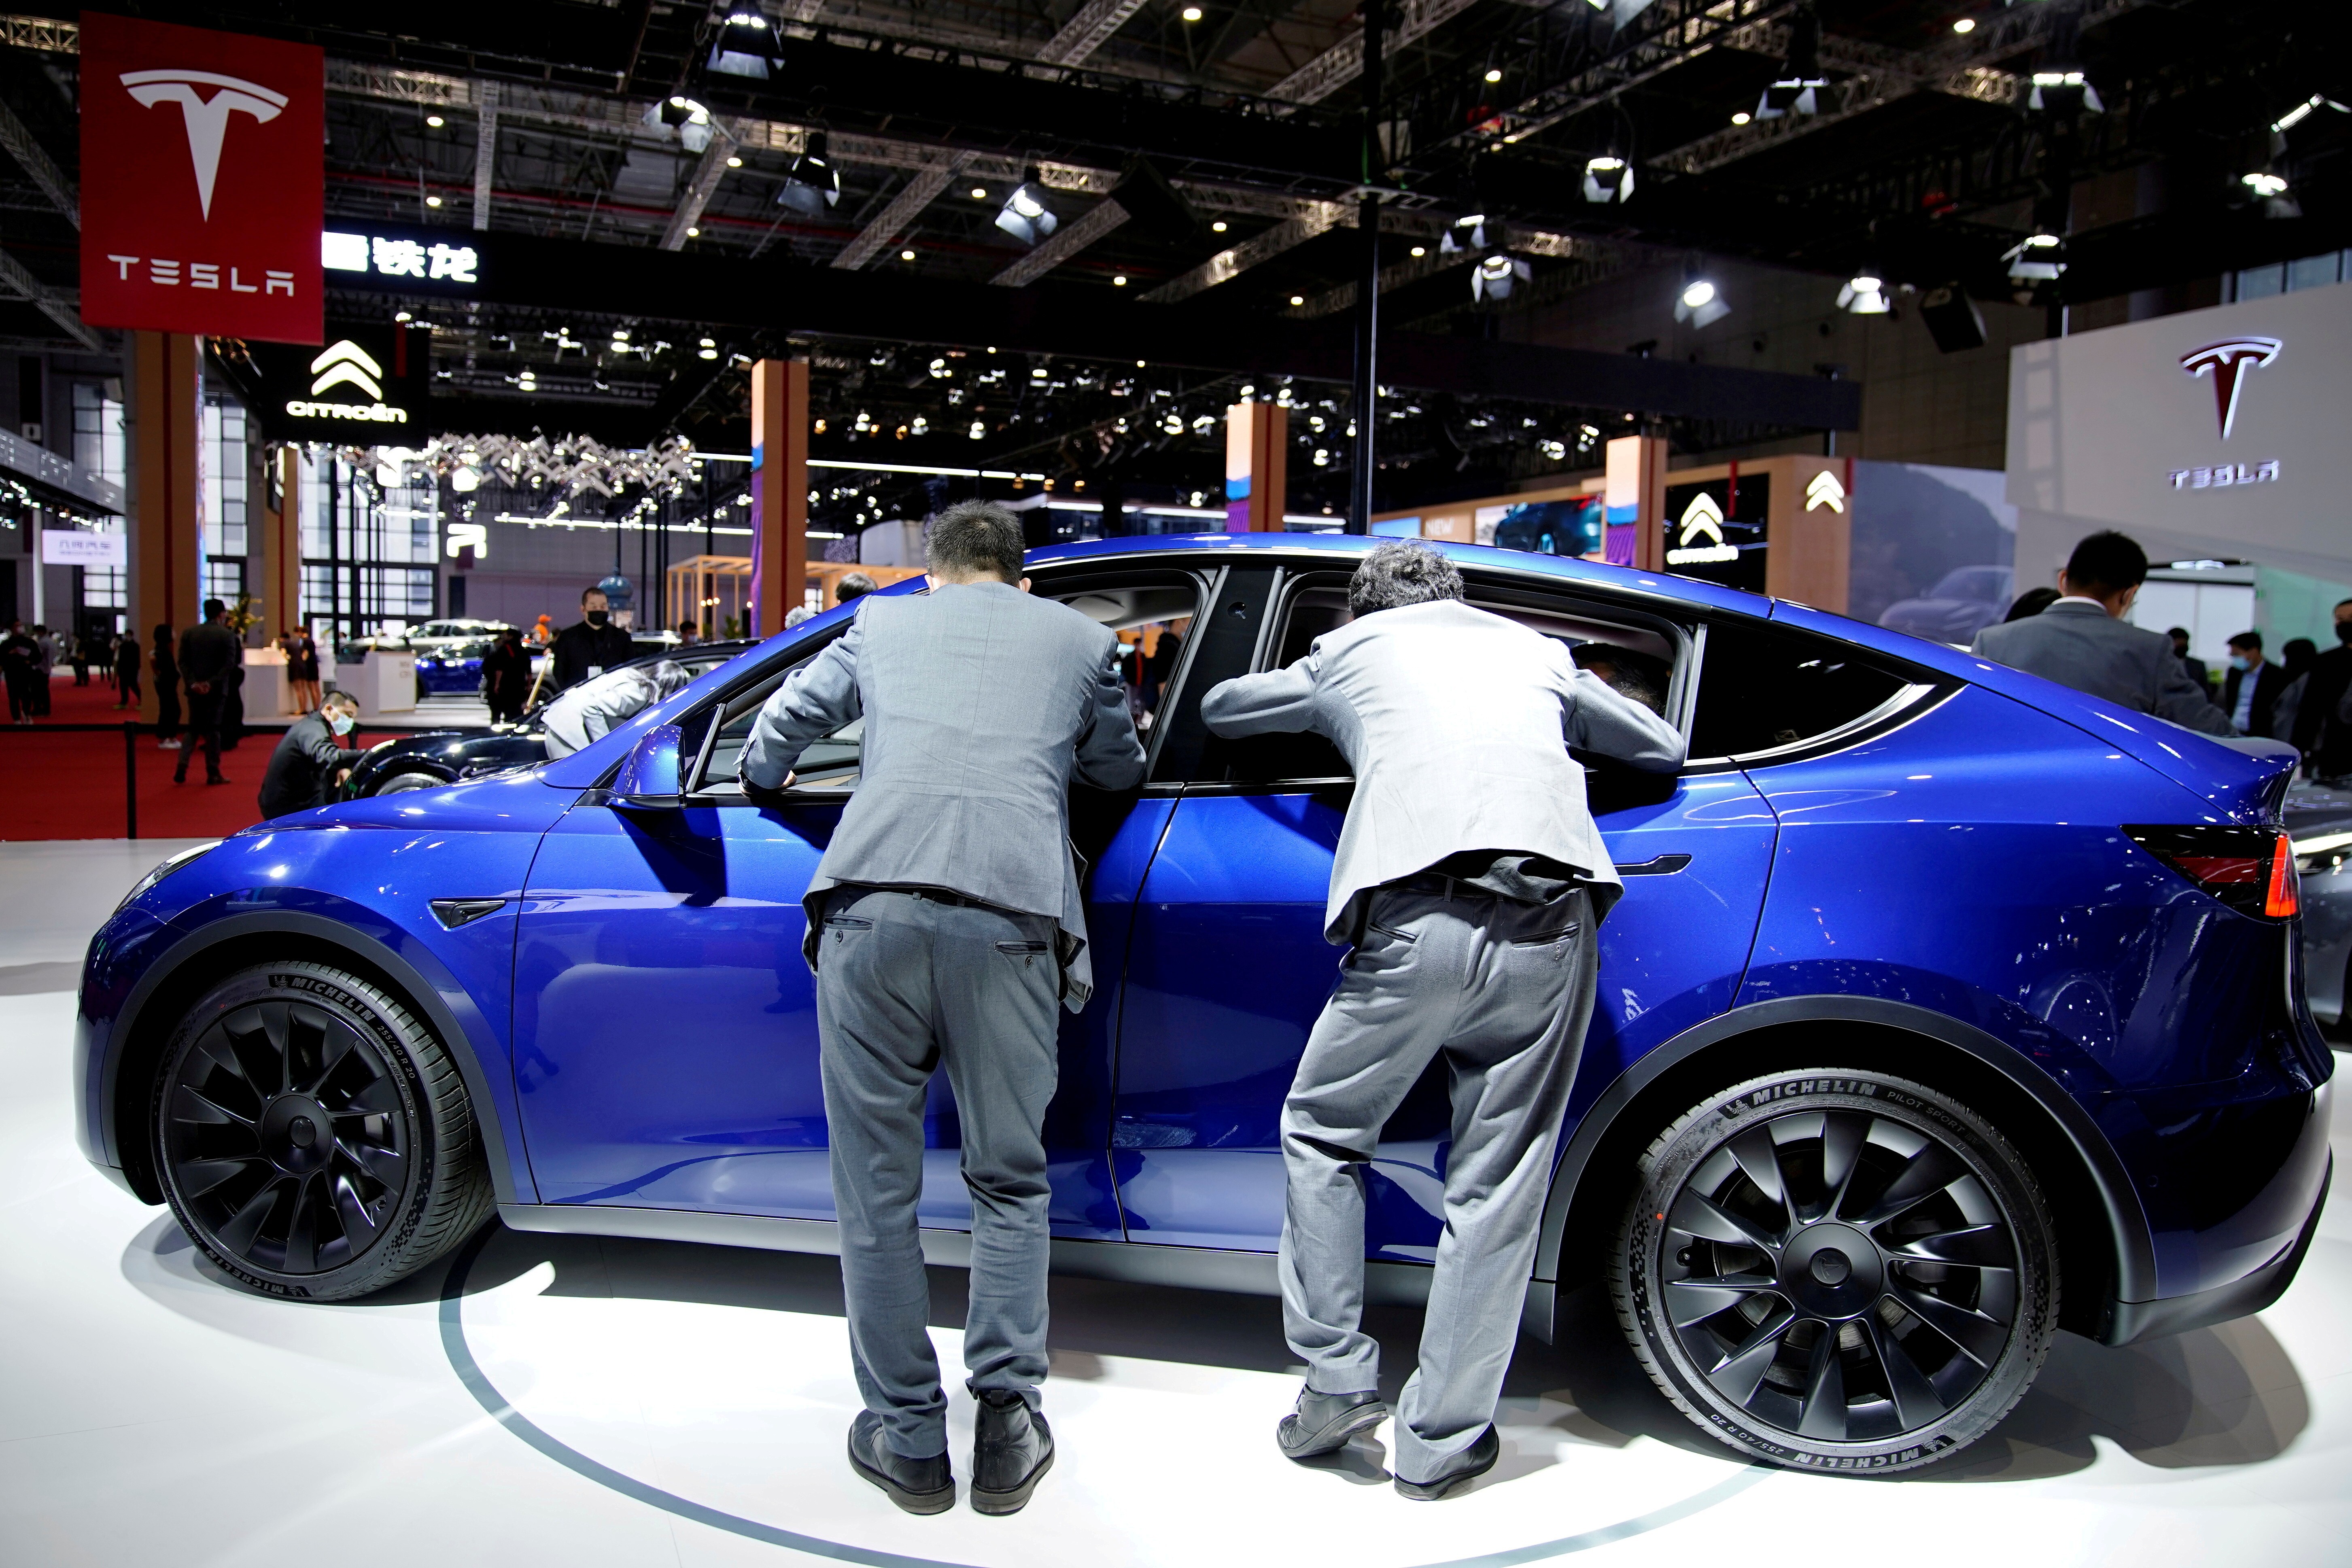 Visitors check an electric vehicle displayed at the Tesla booth during media day at the Auto Shanghai trade show on April 20, 2021. Photo: Reuters